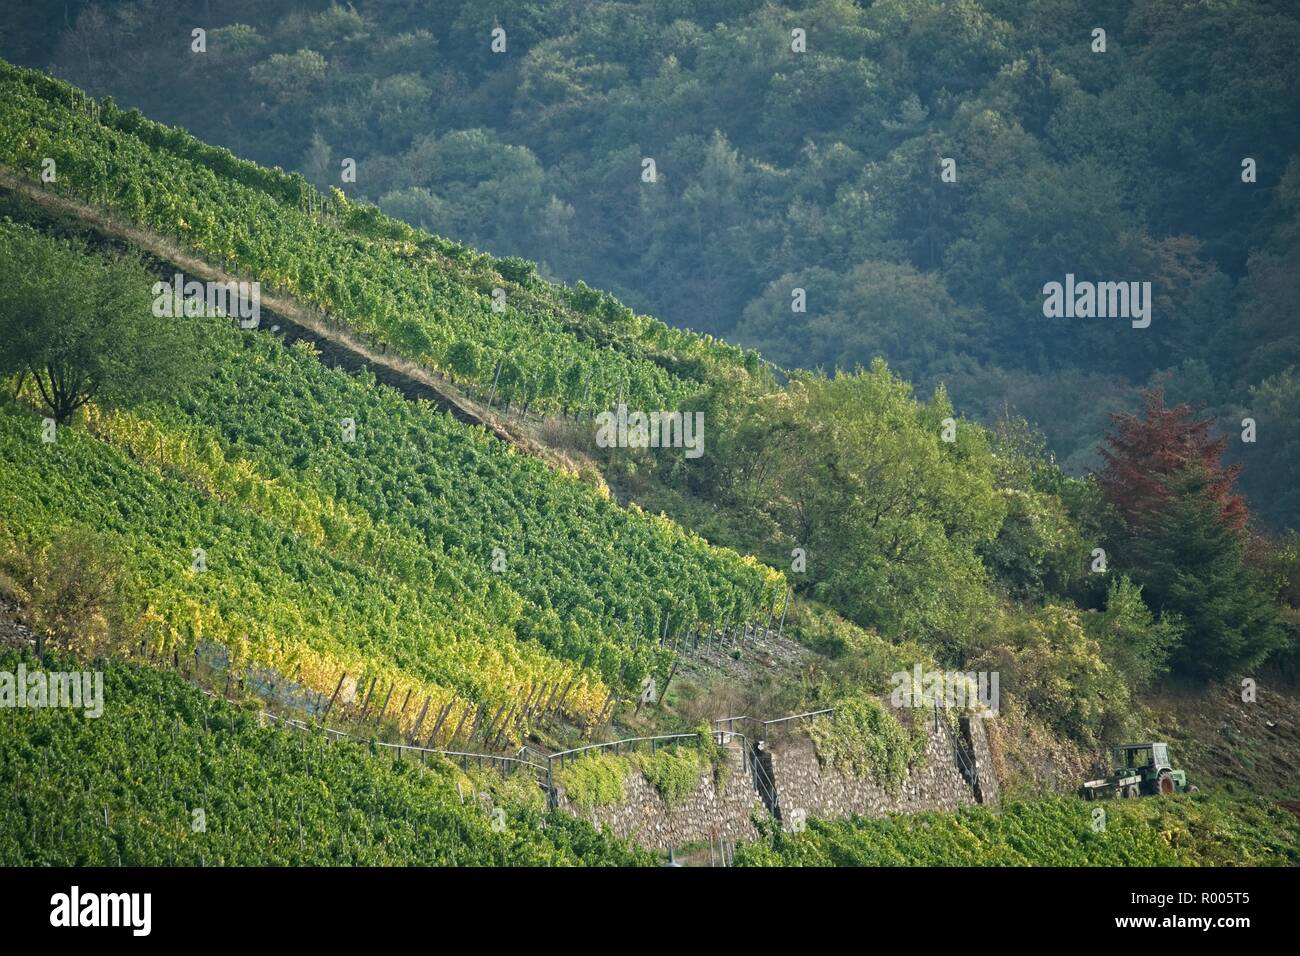 TRABEN-TRARBACH VINEYARDS THE RIVER MOSEL VALLEY GERMANY Stock Photo